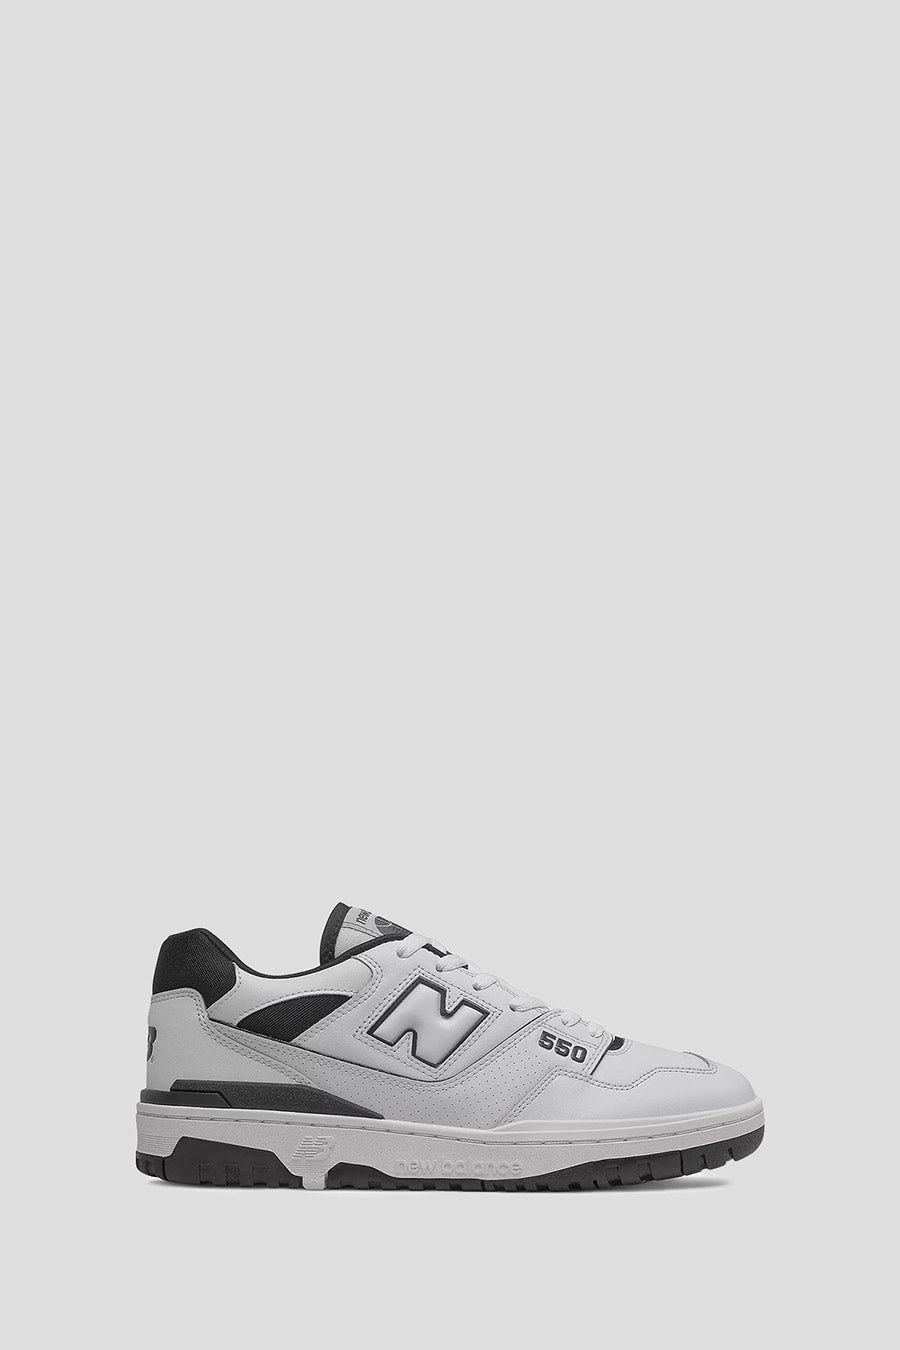 NEW BALANCE - WHITE AND BLACK 550 SNEAKERS - LE LABO STORE